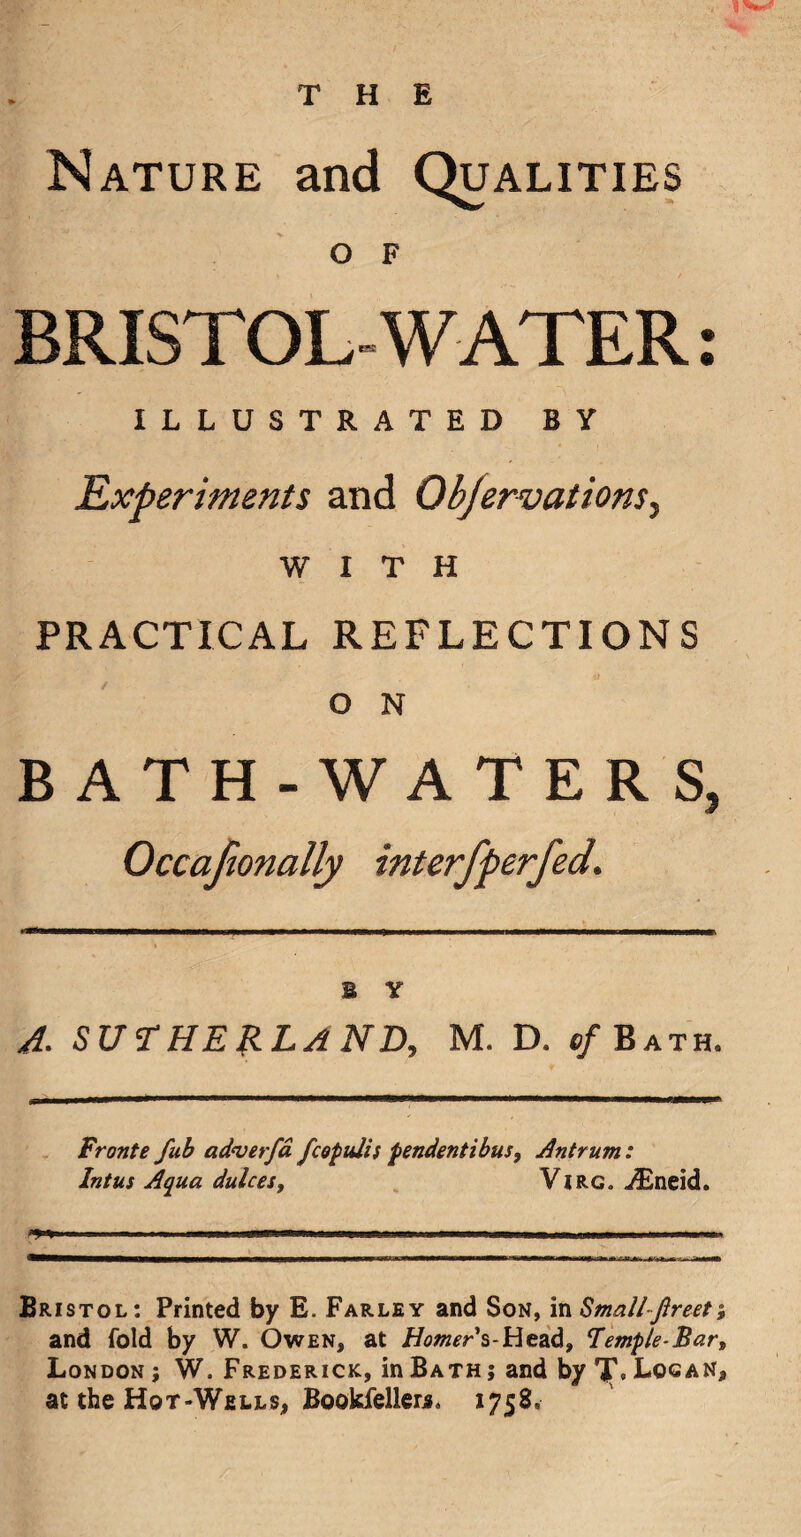 Nature and Qualities O F BRISTOL-WATER: ILLUSTRATED BY Experiments and Objervations^ WITH PRACTICAL REFLECTIONS O N BATH-WATERS, Occafionally interfperfed. B Y A. SUTHERLAND, M. D. c/Bath. Fronte fub adverfa fcopuli s pendentibus. Antrum: Intus Aqua dulces, Virc. ./Eneid. Bristol: Printed by E. Farley and Son, in Smallfireet; and fold by W. Owen, at Homer s-Head, Temple-Bar, London ; W. Frederick, in Bath j and by TT, Logan, at the Hot-Wells, Bookielleri. 1758,